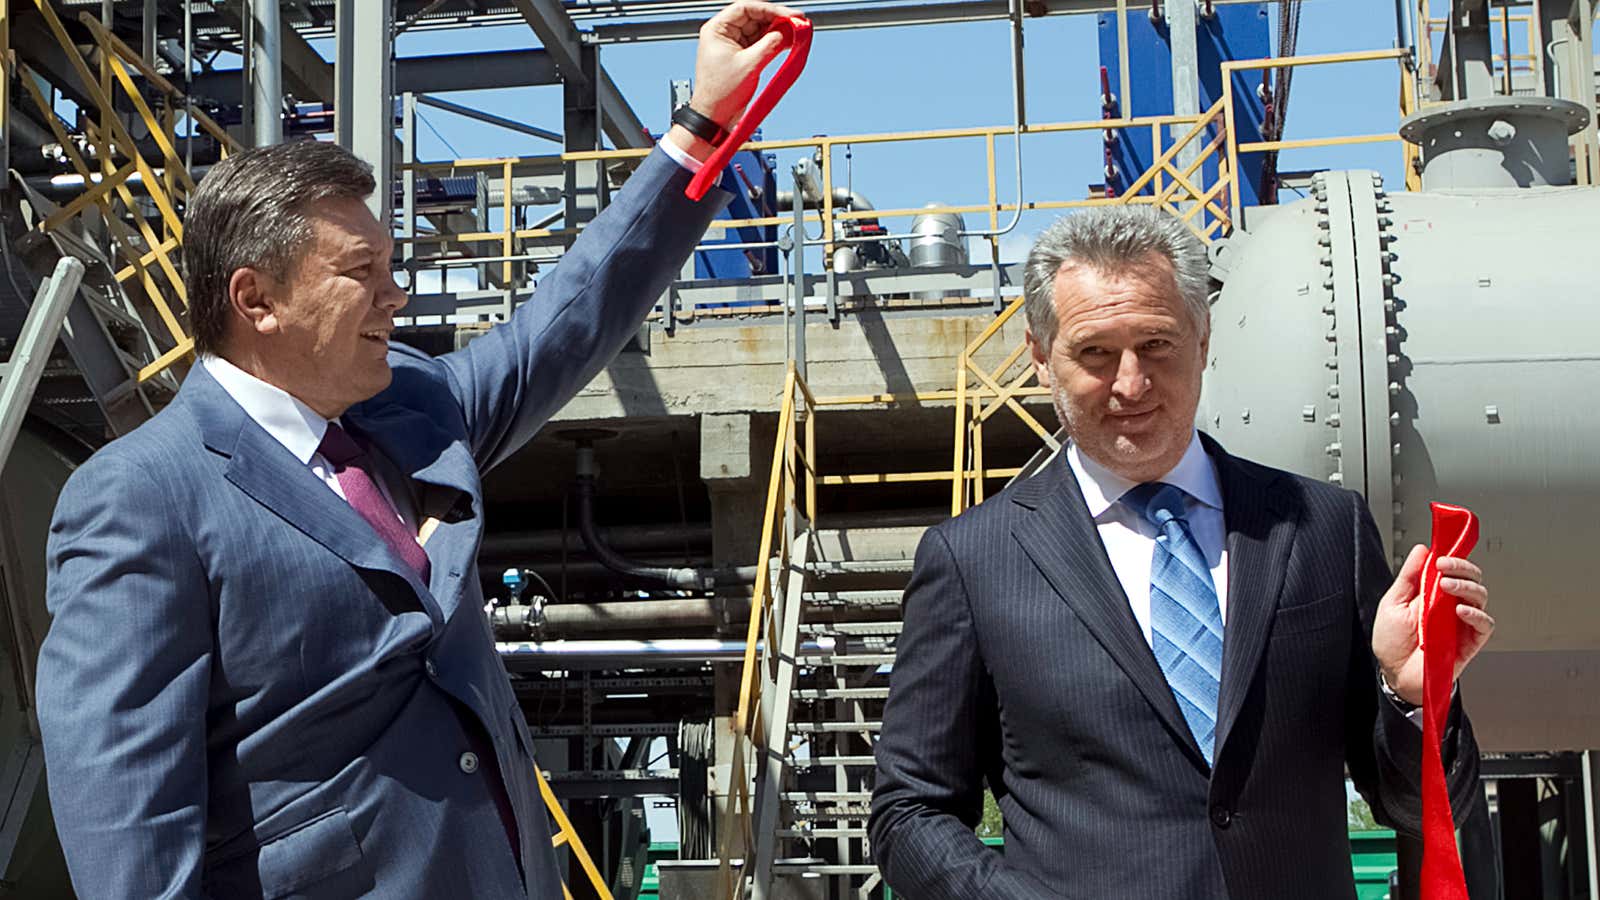 Dymtro Firtash, right, in happier days, with ousted Ukrainian President Victor Yanukovych.